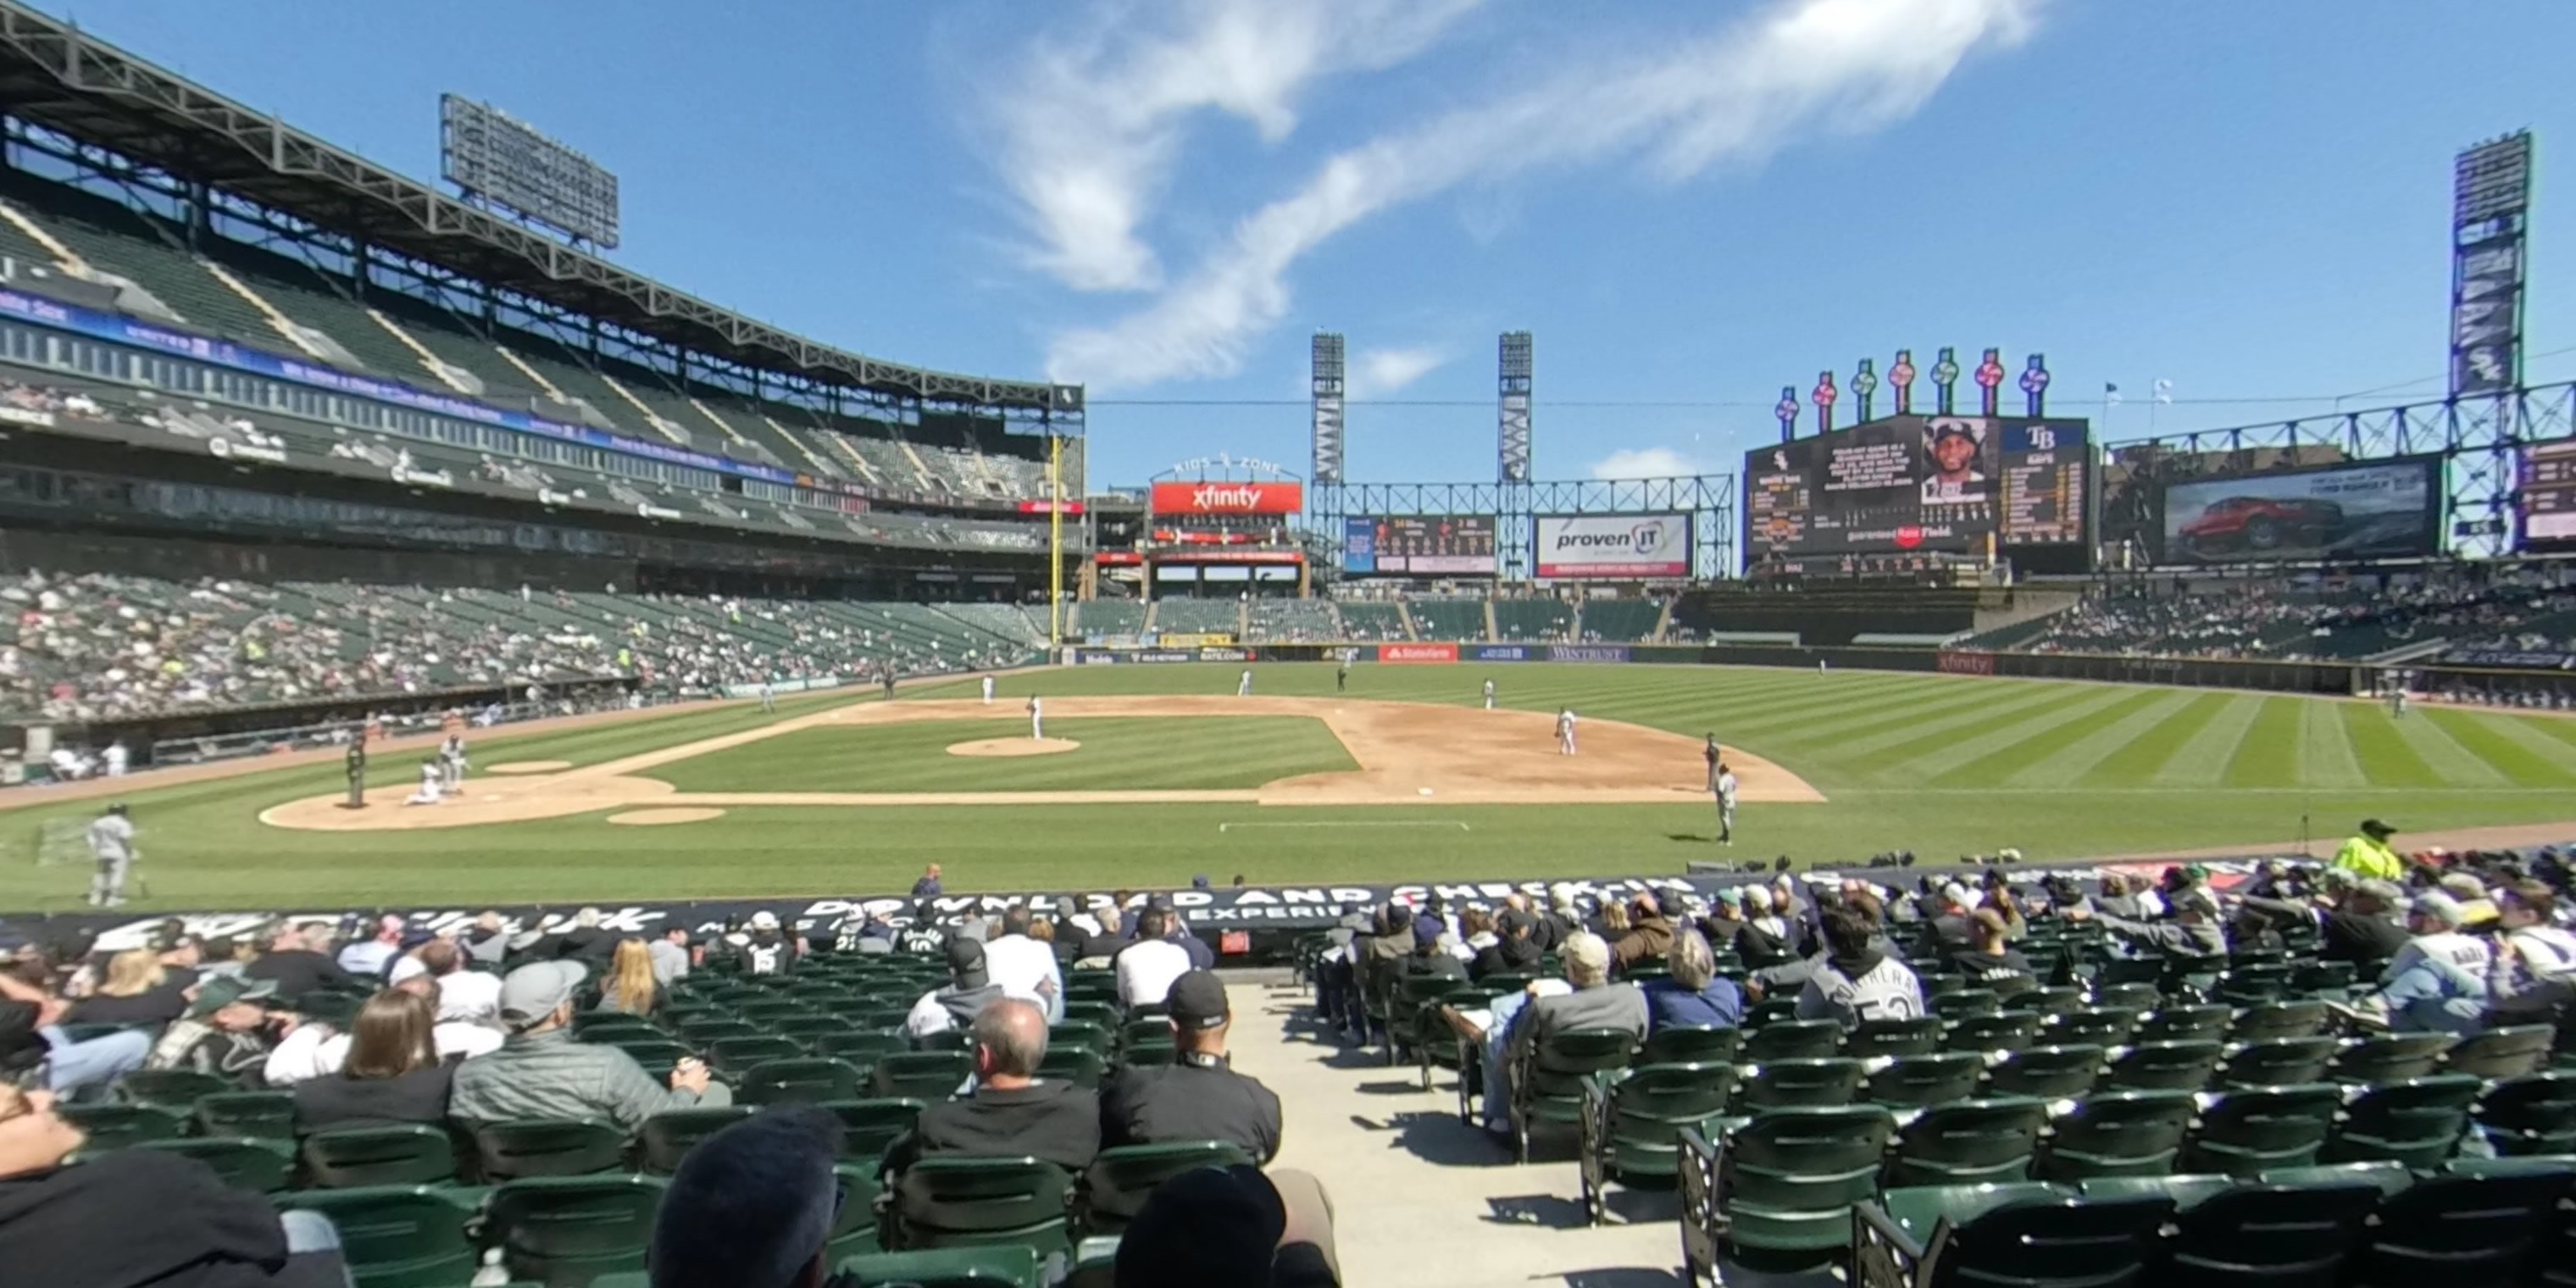 Section 124 at Guaranteed Rate Field 